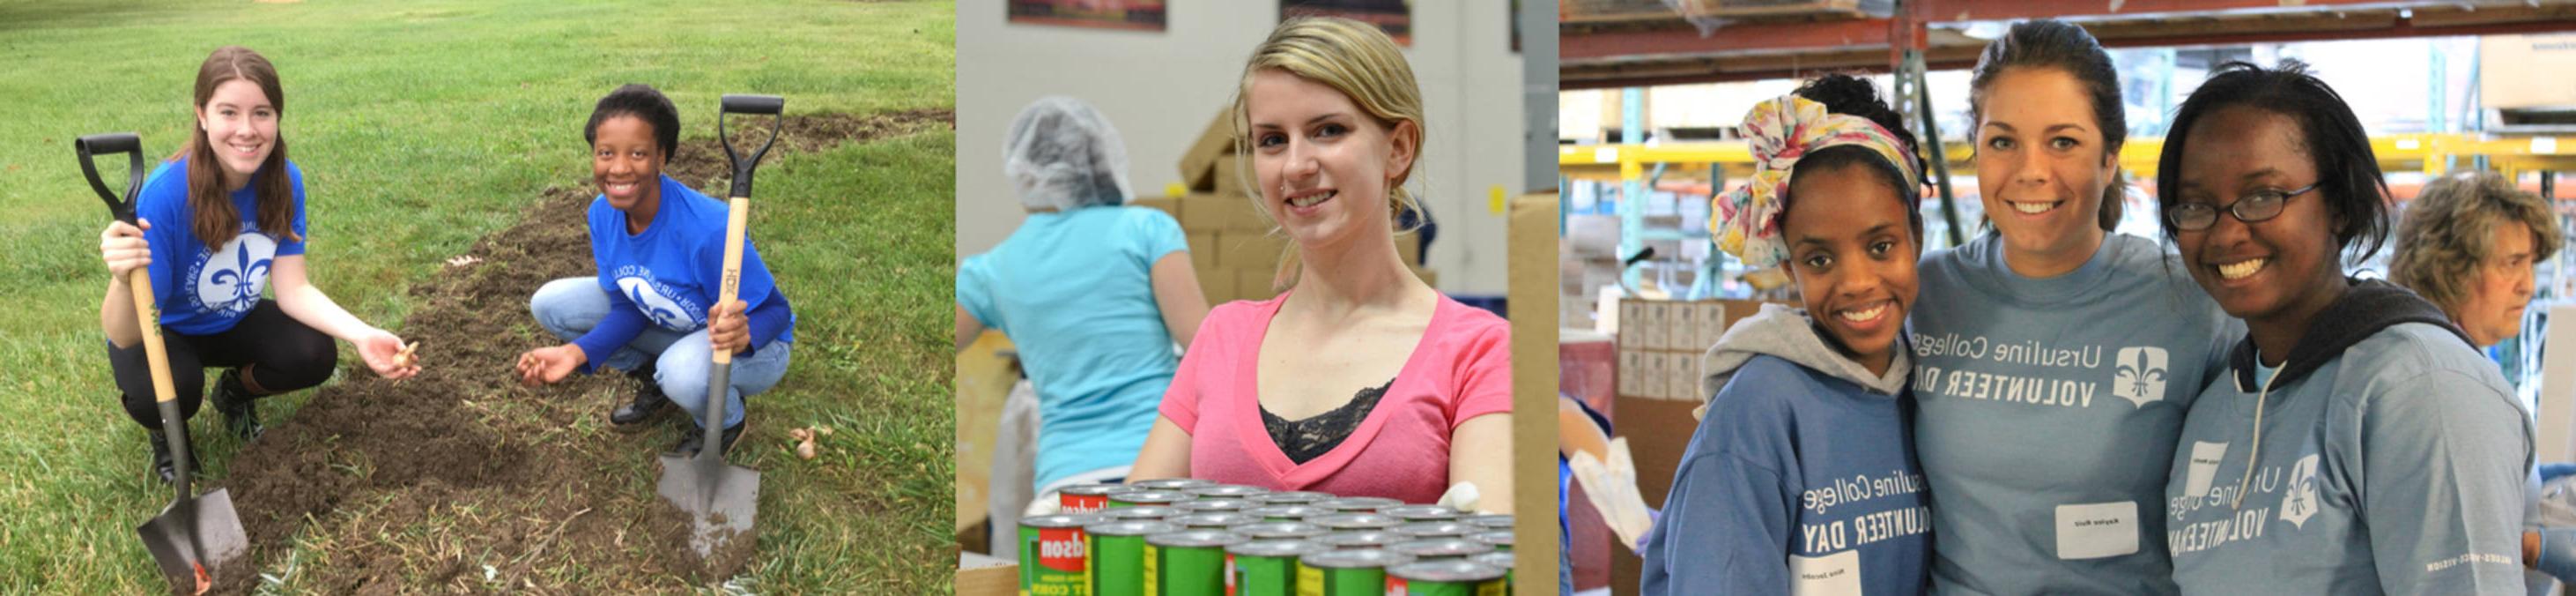 Ursuline college students helping in the community